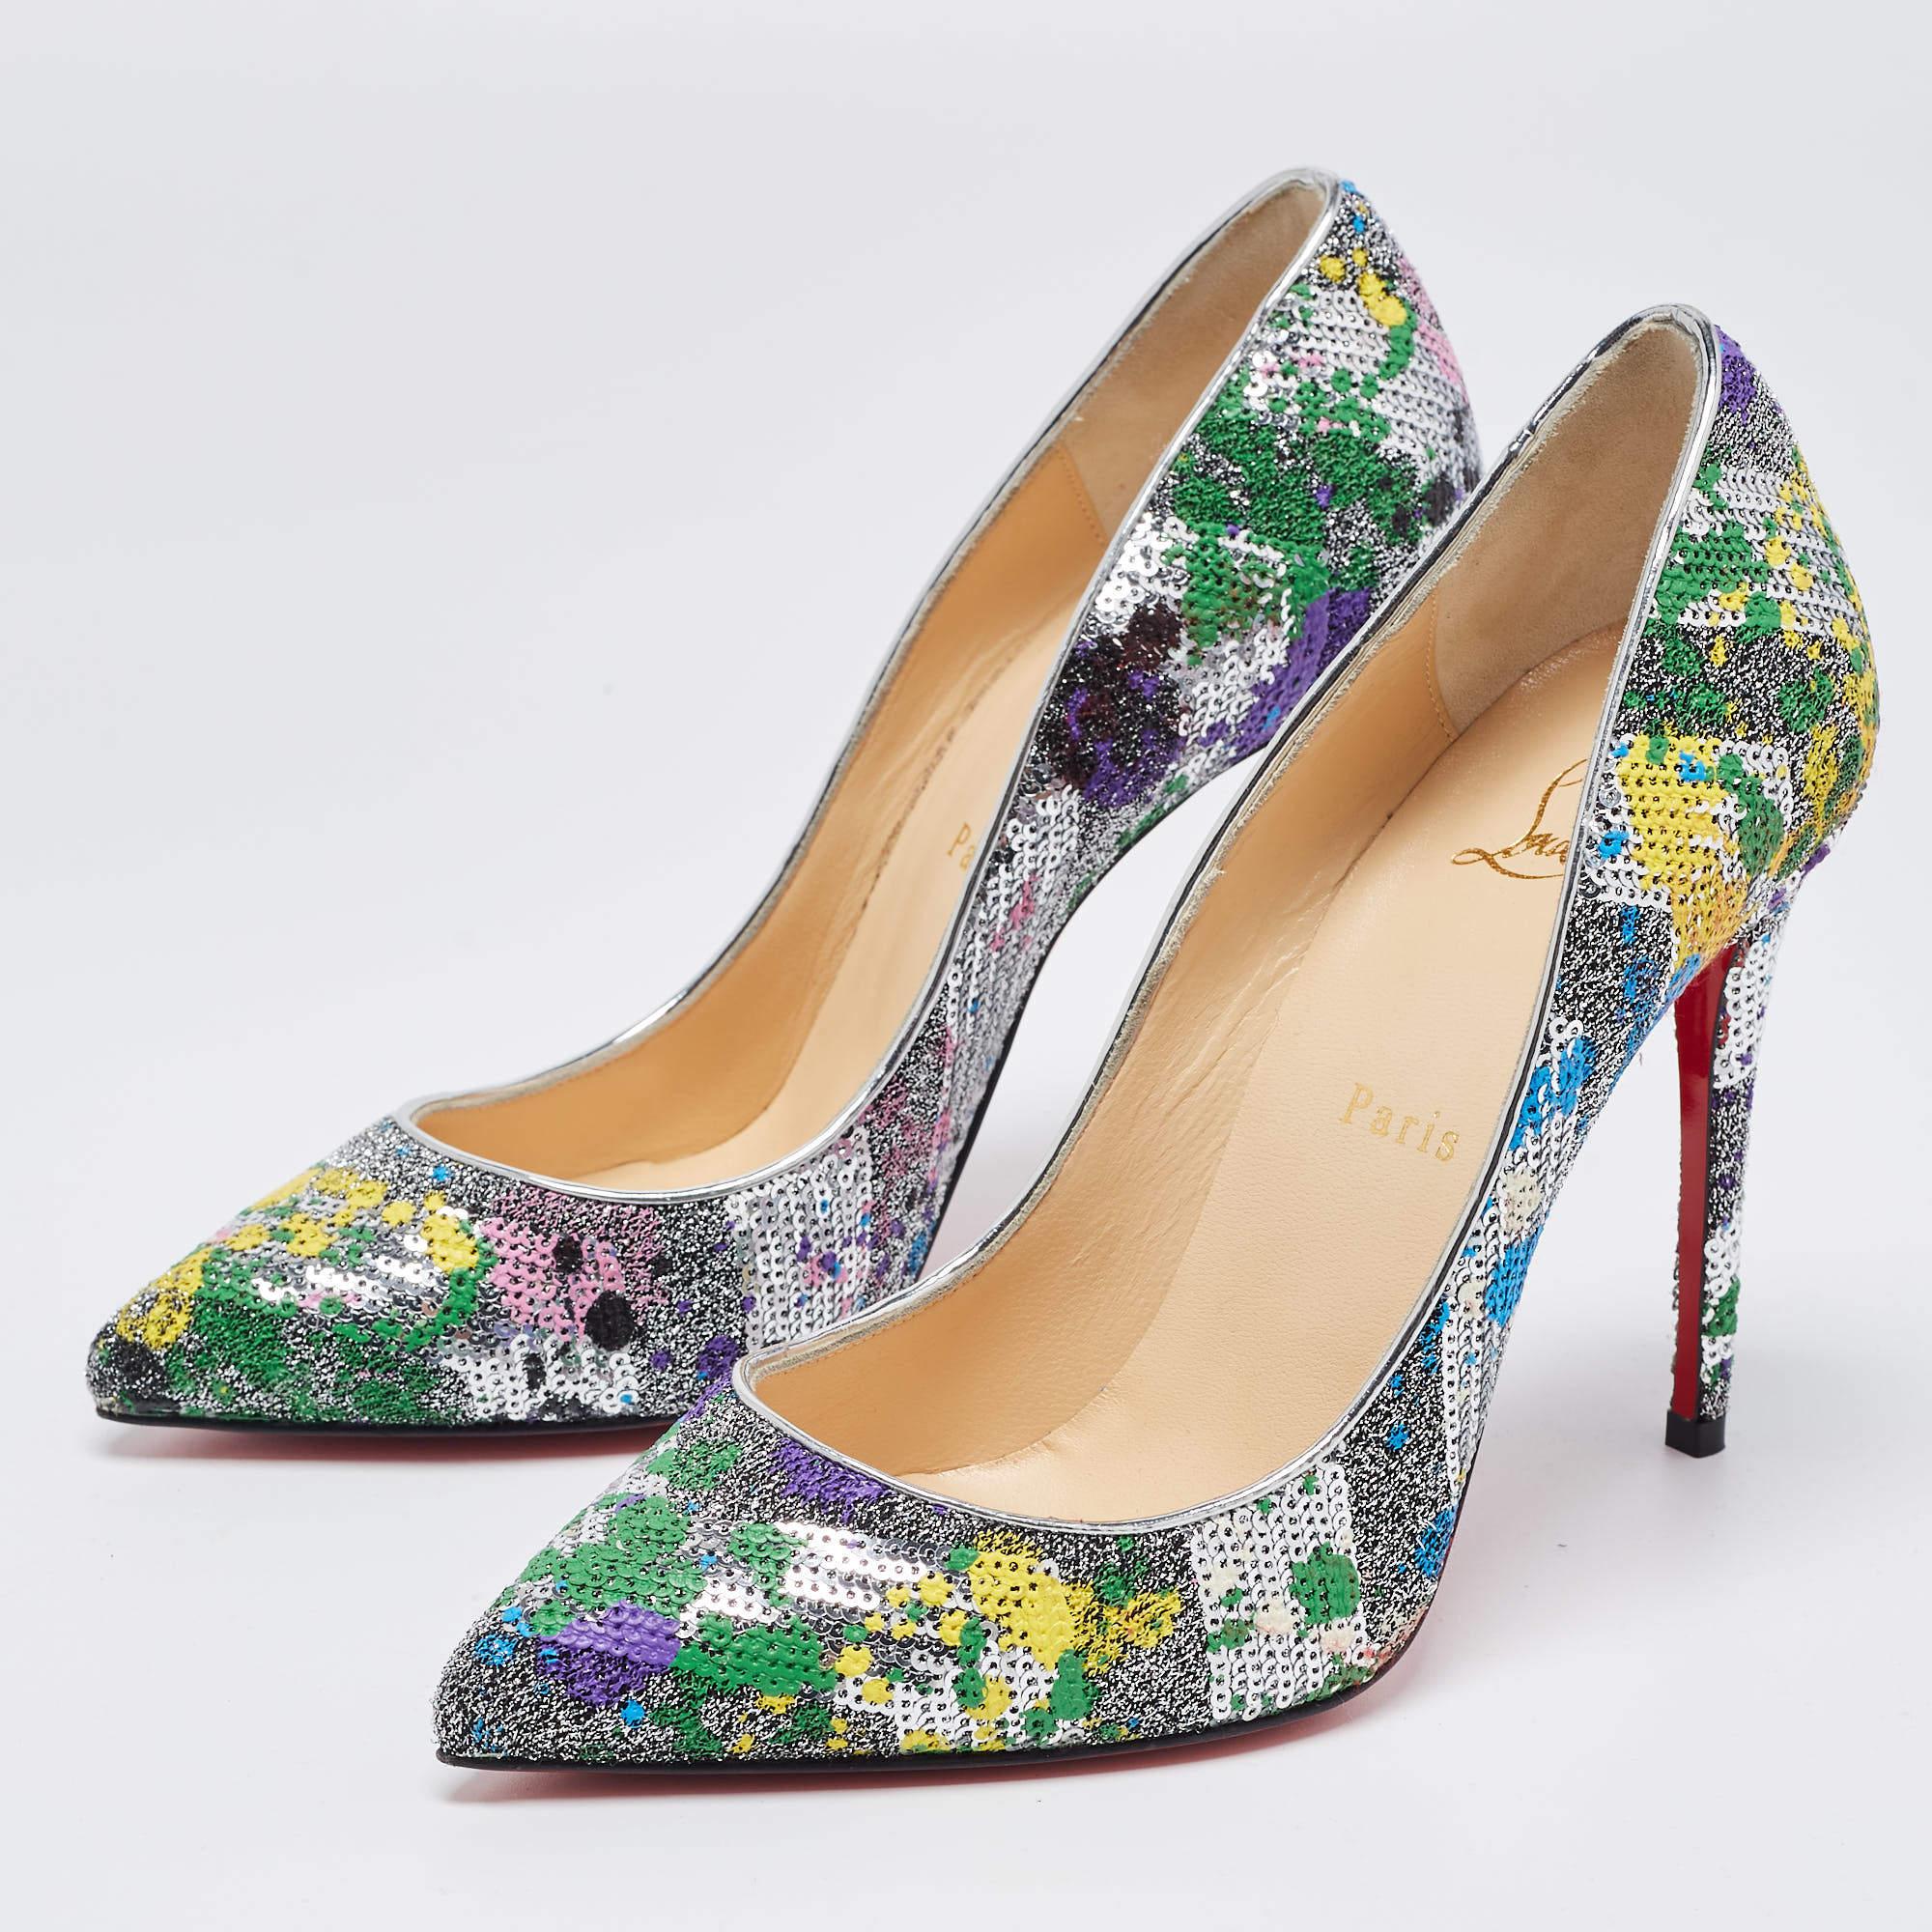 Christian Louboutin Multicolor Sequins and Brocade Pointed Toe Pumps Size 38 3